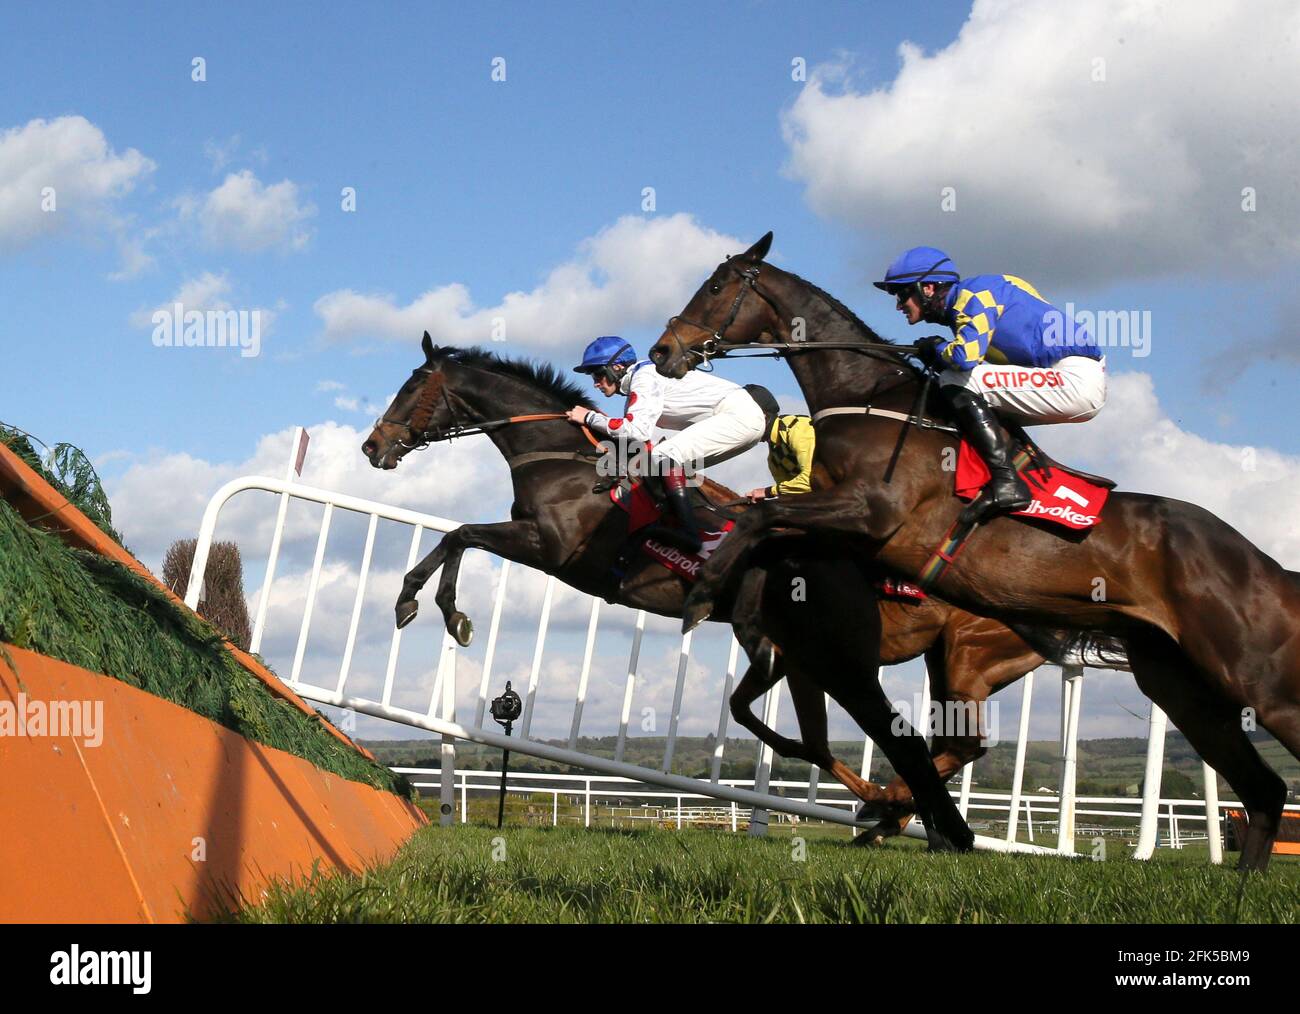 Clan Des Obeaux ridden by Sam Twiston-Davies (right) goes on to win The Ladbrokes Punchestown Gold Cup during day two of the Punchestown Festival at Punchestown Racecourse in County Kildare, Ireland. Issue date: Wednesday April 28, 2021. Stock Photo